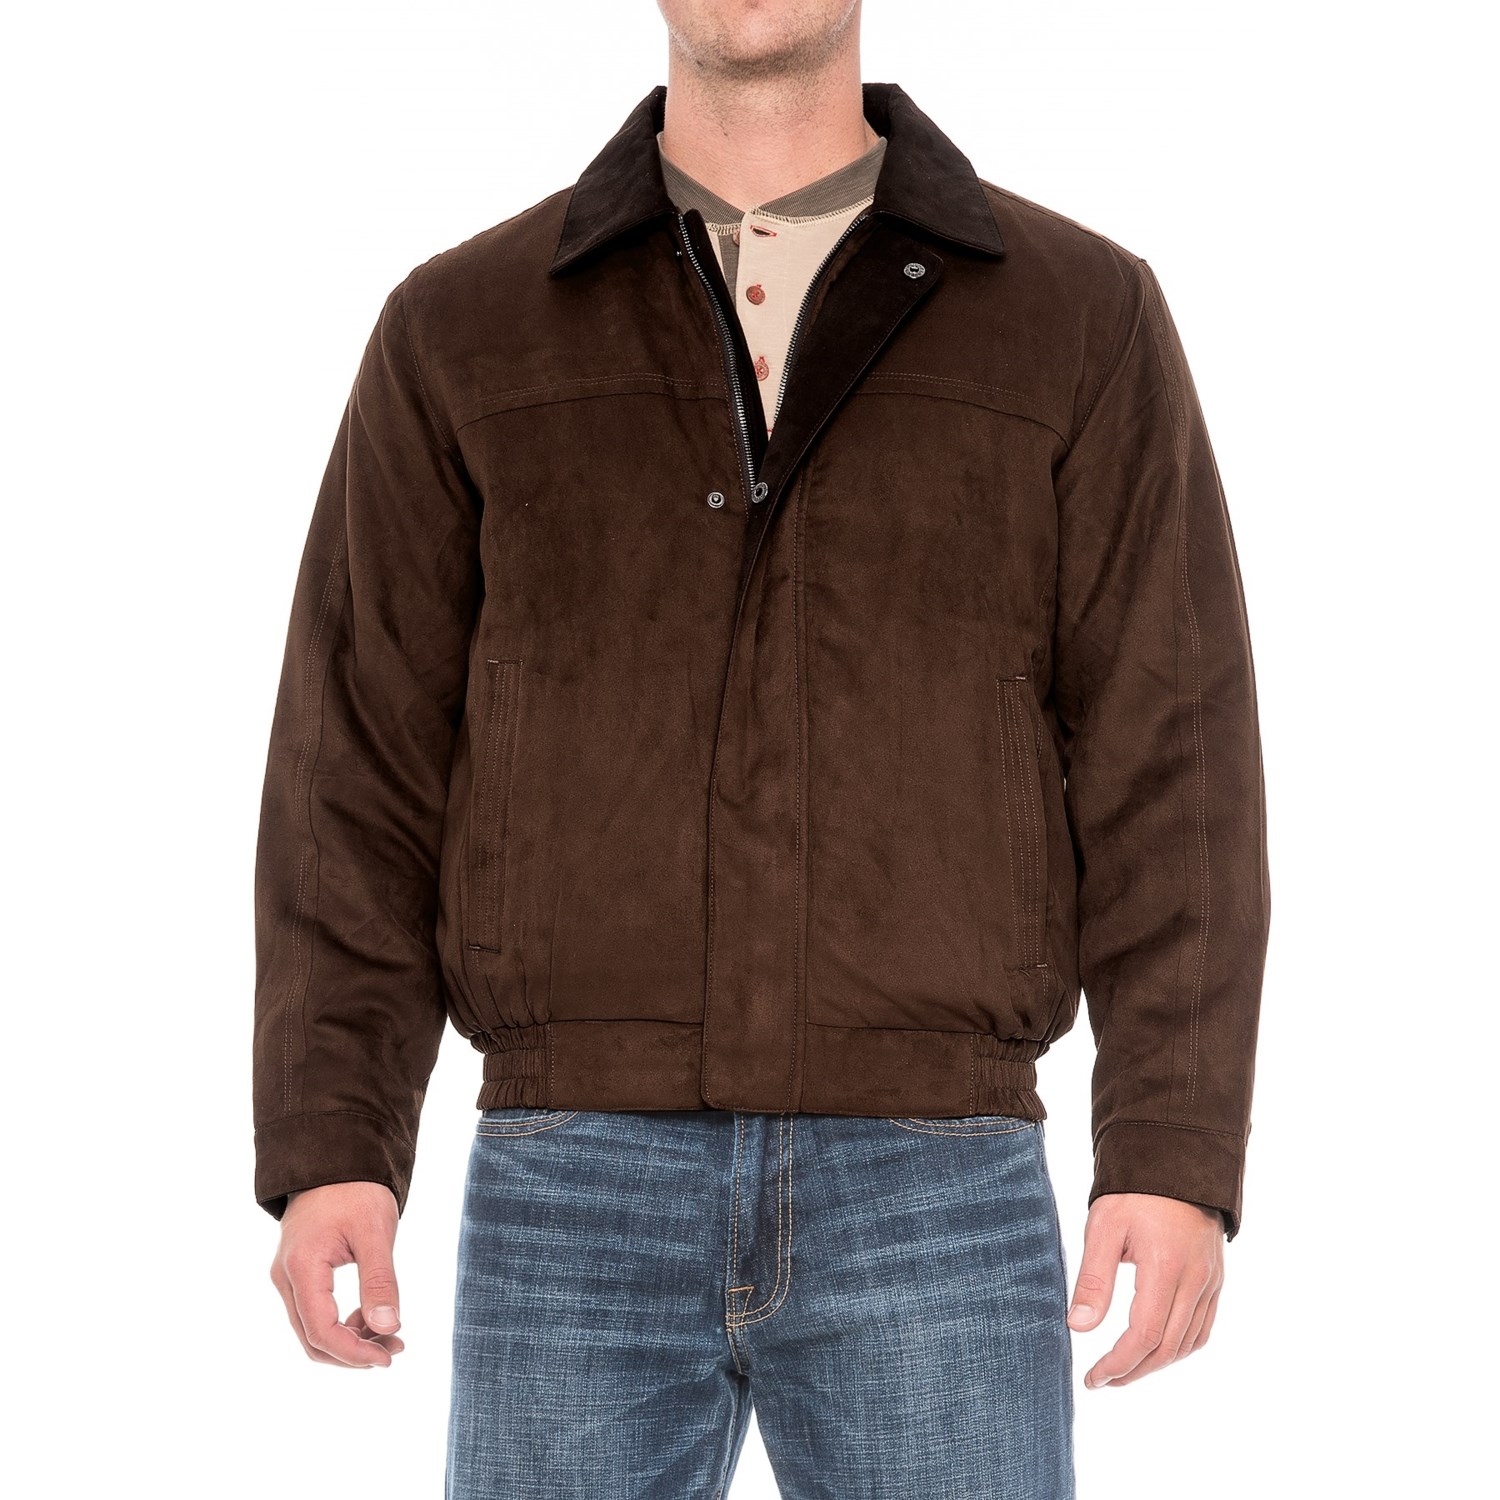 Weatherproof Microsuede Polyfill Bomber Jacket (For Men) - Save 55%